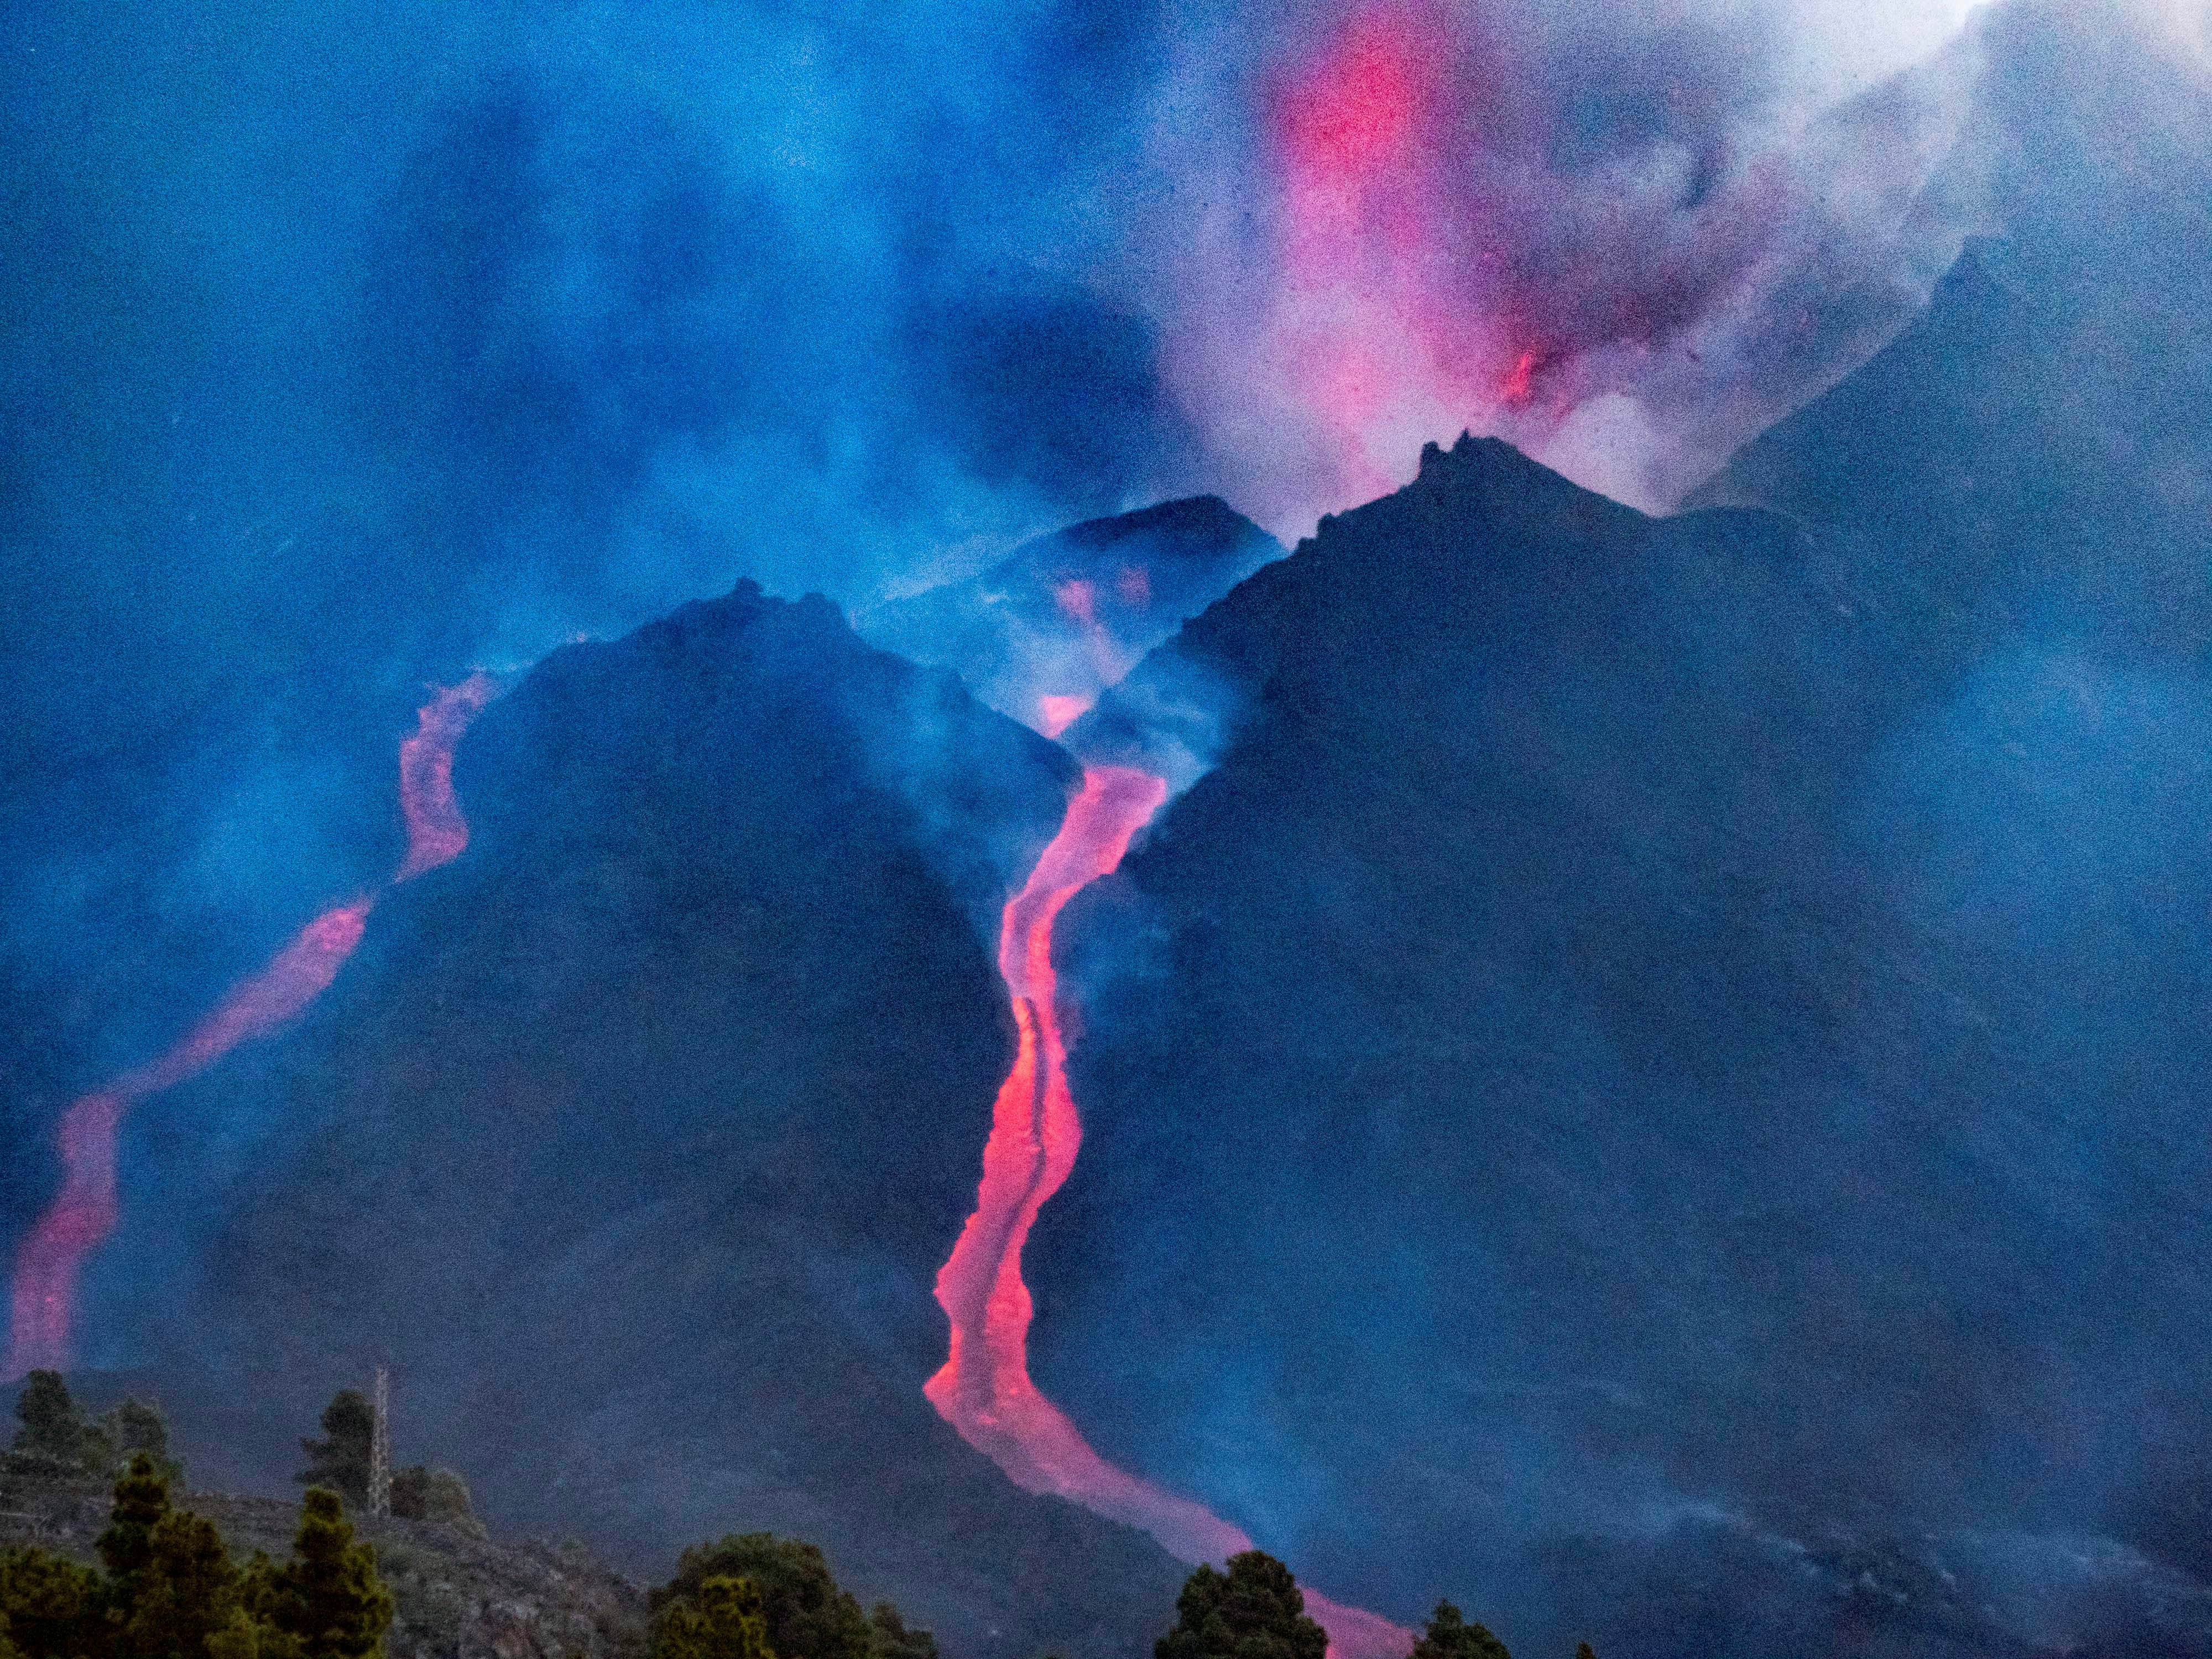 The Cumbre Vieja volcano began erupting on 19 September, since destroying nearly 1,150 buildings.